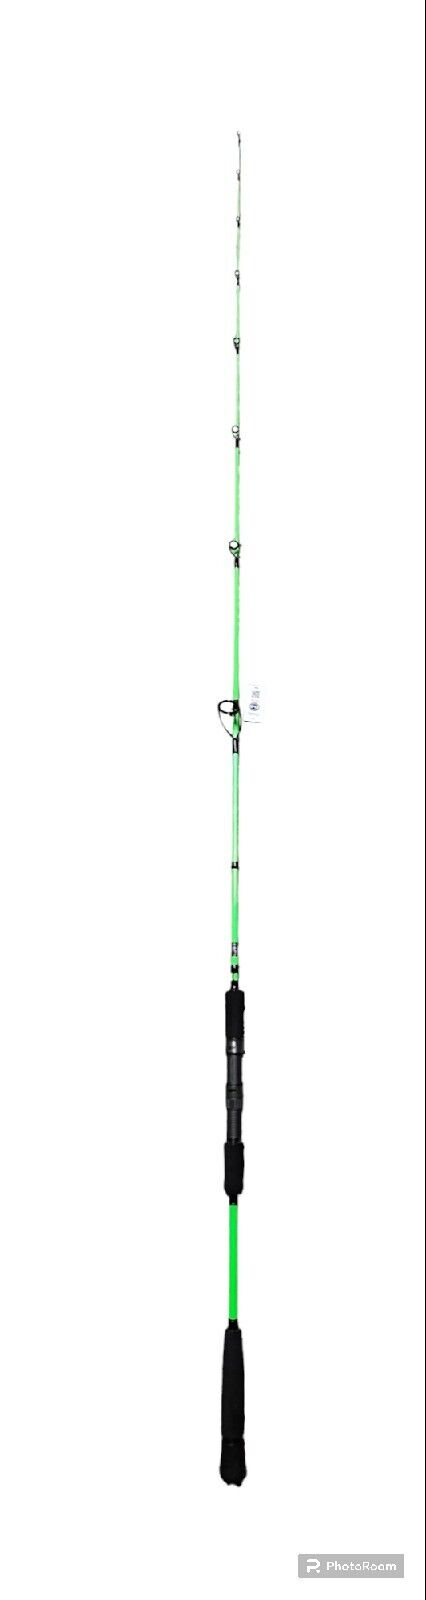 M3Tackle Carbon Drag-On Inshore Spinning Rod M3D701-MLF 7 17-35lbs 1/